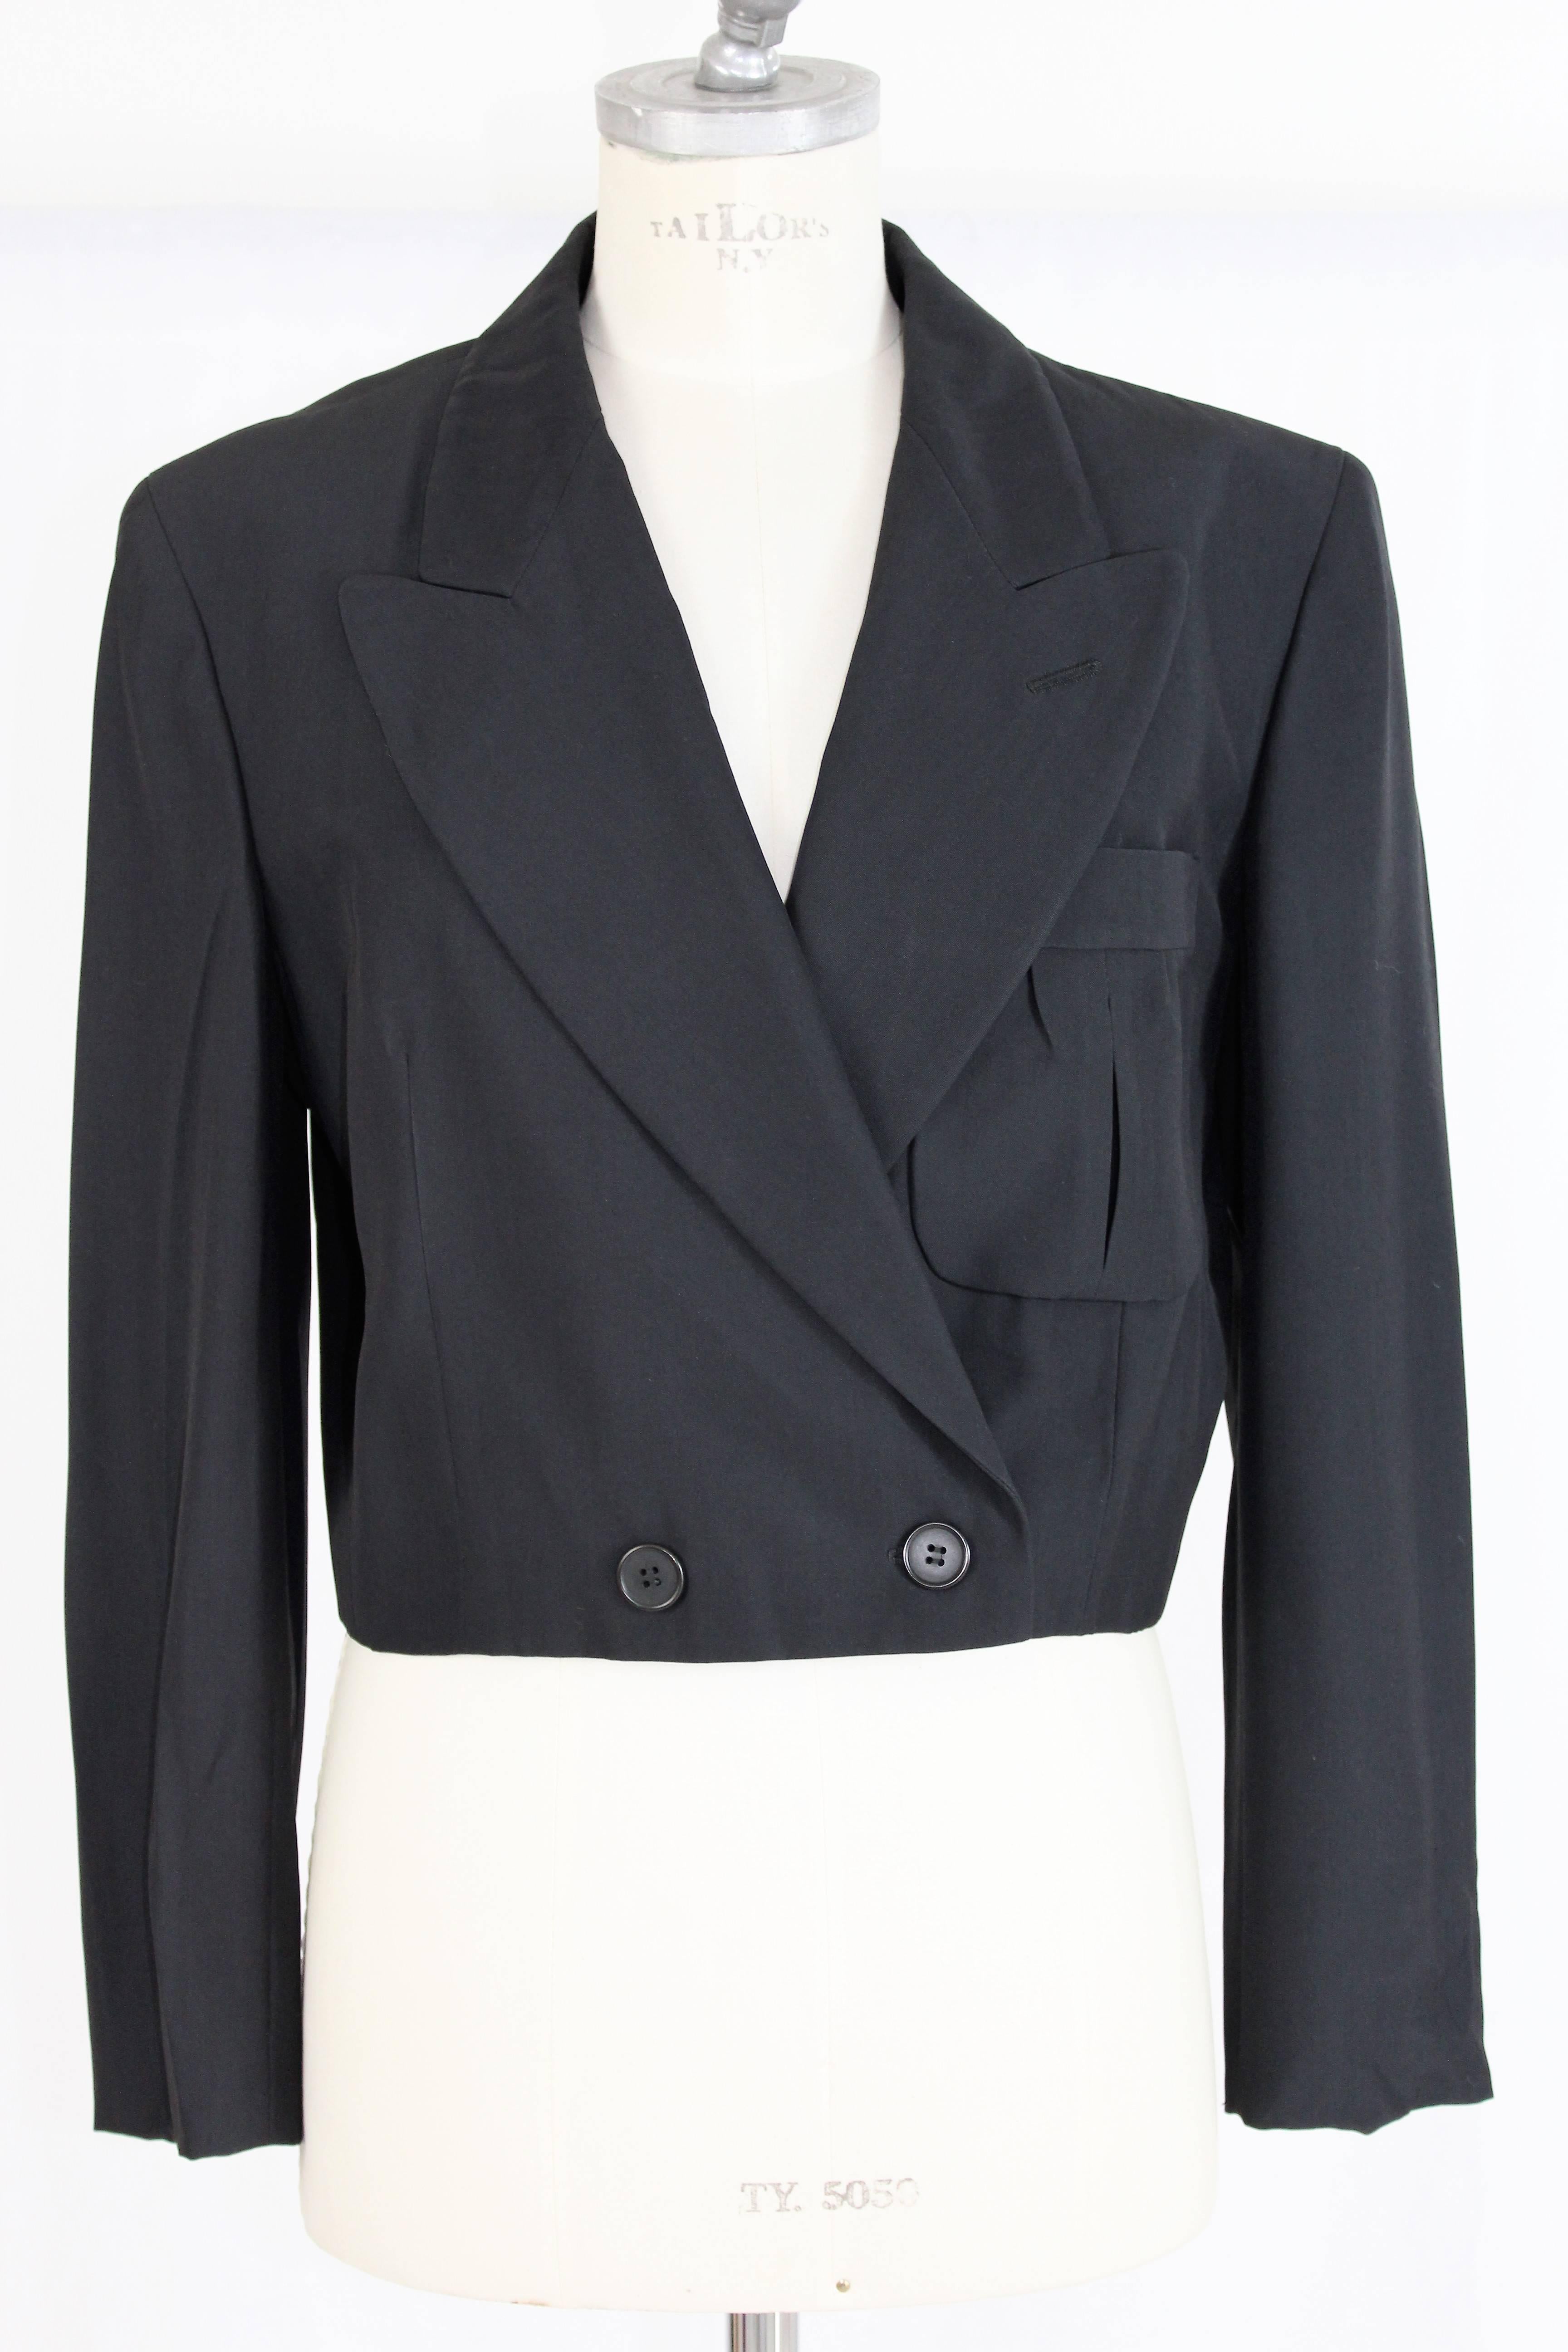 Alberta Ferretti jacket short. Black, double-breasted buttoning at the waist. Excellent vintage conditions

Size 42 (IT)

Measures
Shoulder: 44 cm
Armpit to armpit: 53 cm
Sleeve: 60 cm
Length: 50 cm

Composition: 60% Wool 40% Rayon
Color: